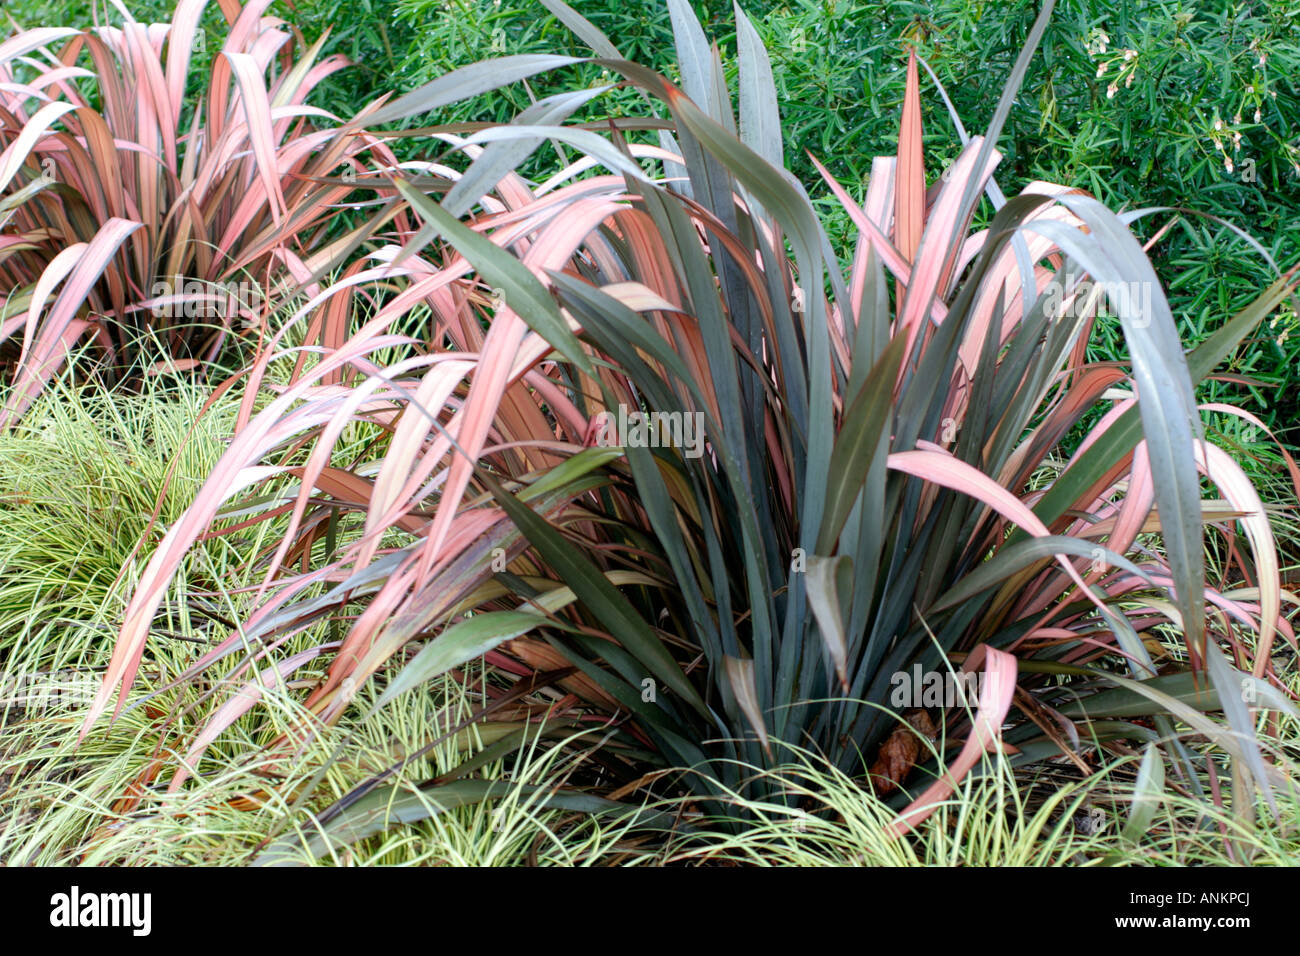 CAREX EVERGOLD WITH PHORMIUM MAORI MAIDEN WHICH IS SHOWING REVERSION AND NEEDS TO BE REMOVED BEFORE IT DOMINATES THE PLANT Stock Photo